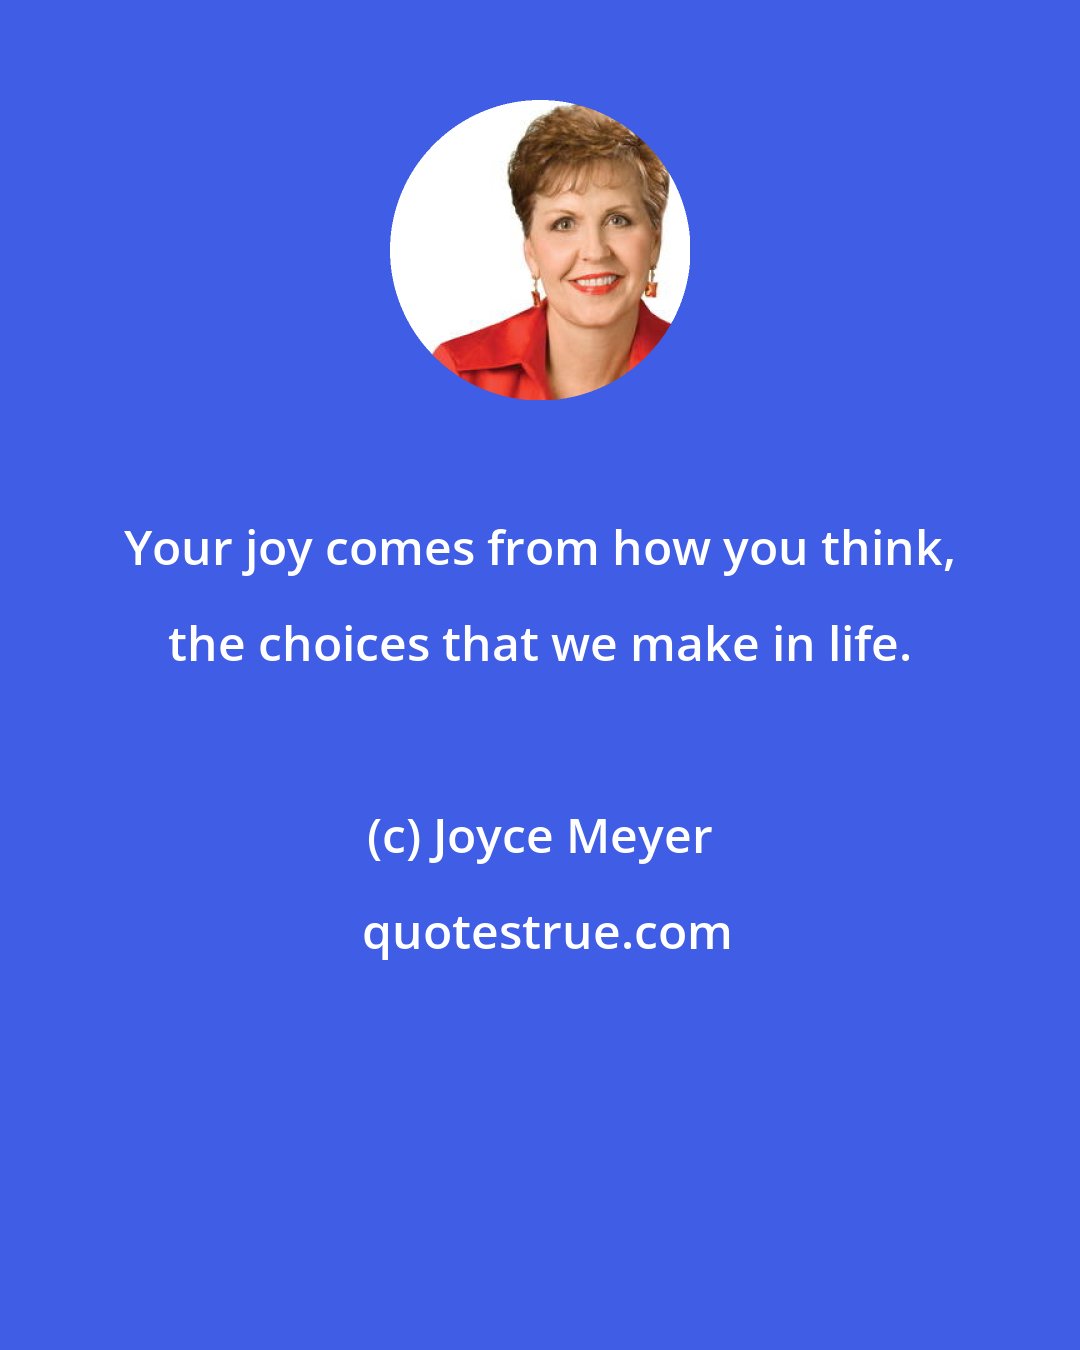 Joyce Meyer: Your joy comes from how you think, the choices that we make in life.